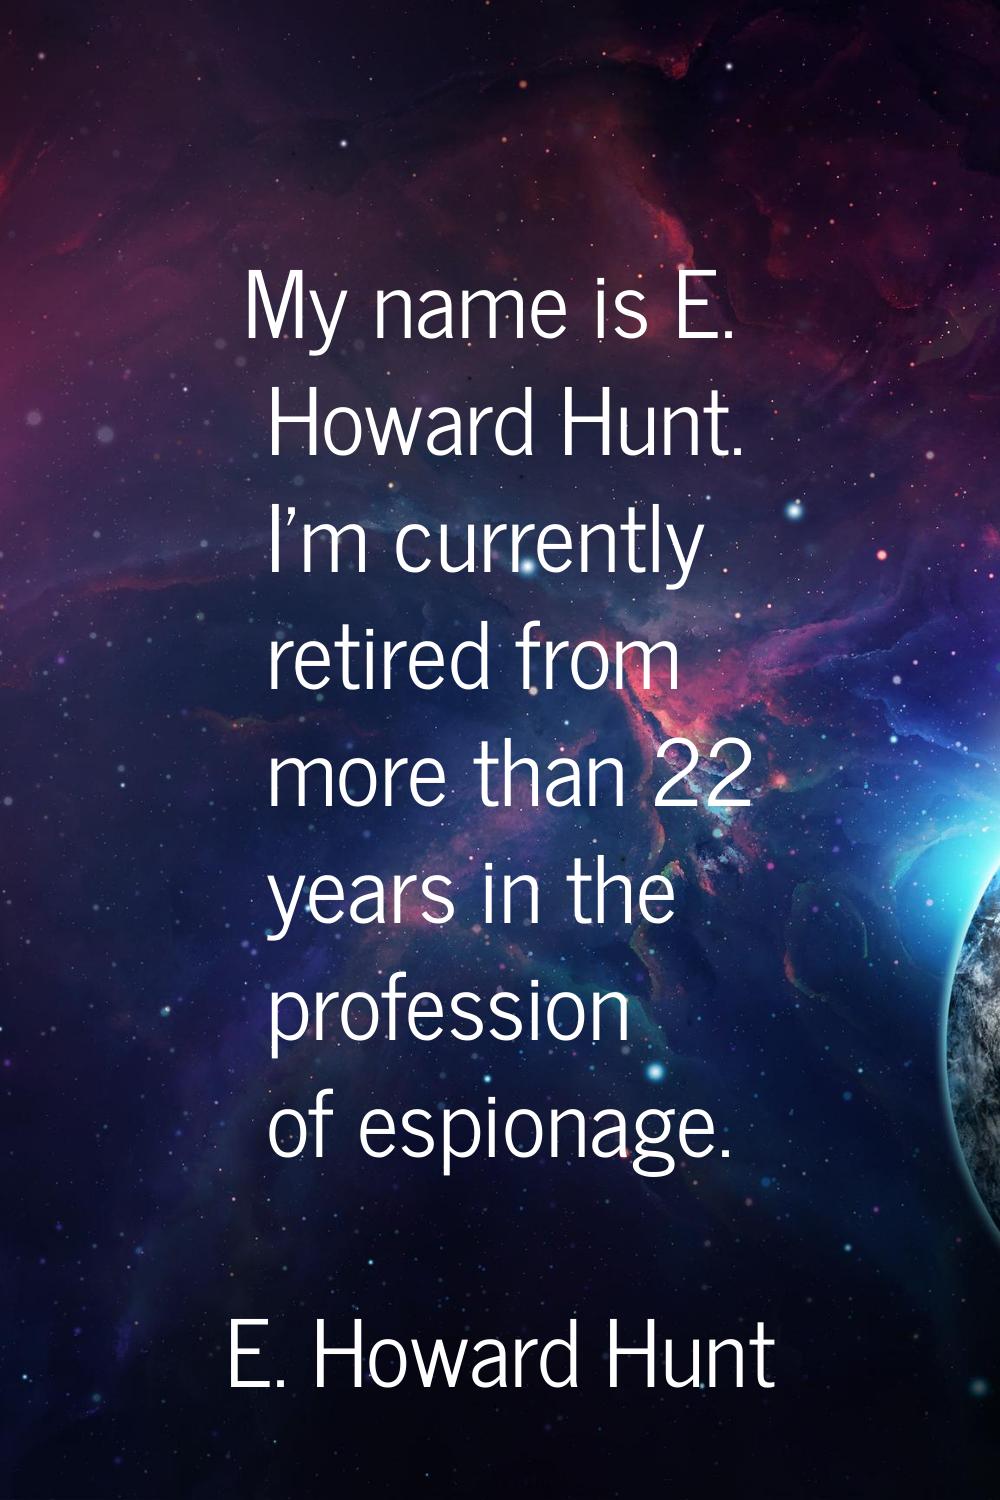 My name is E. Howard Hunt. I'm currently retired from more than 22 years in the profession of espio